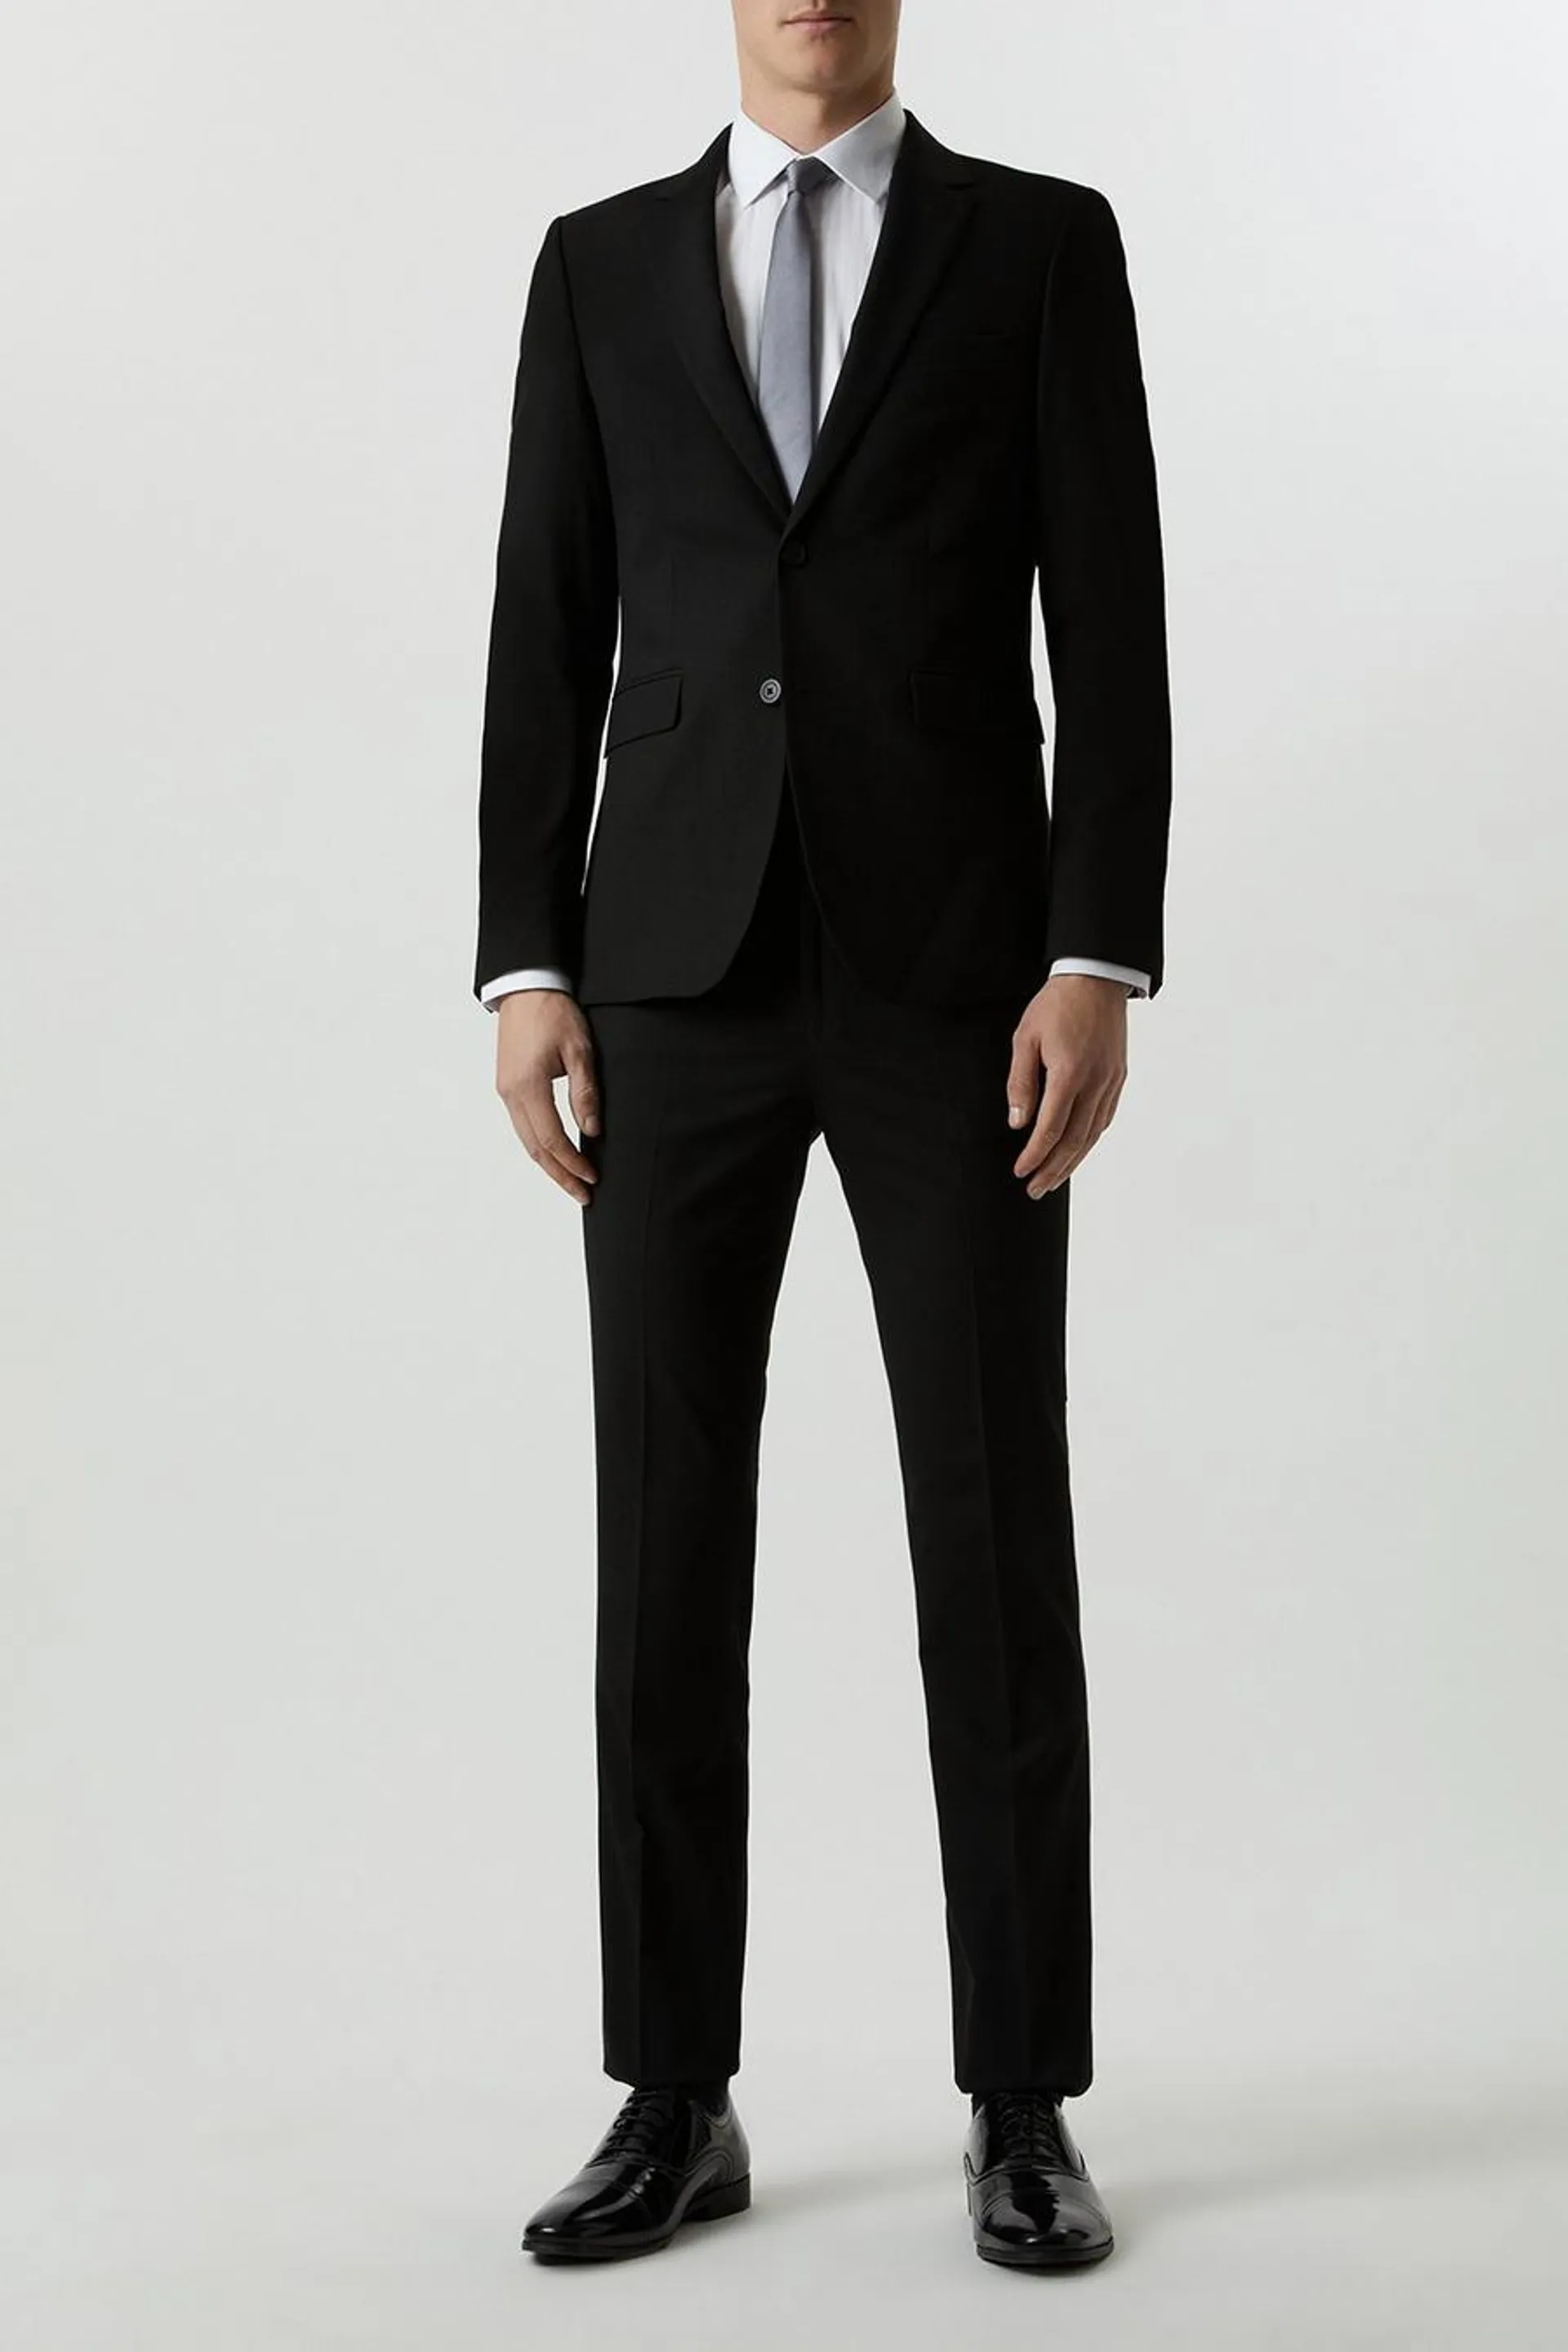 Tailored Fit Navy Essential Three-Piece Suit